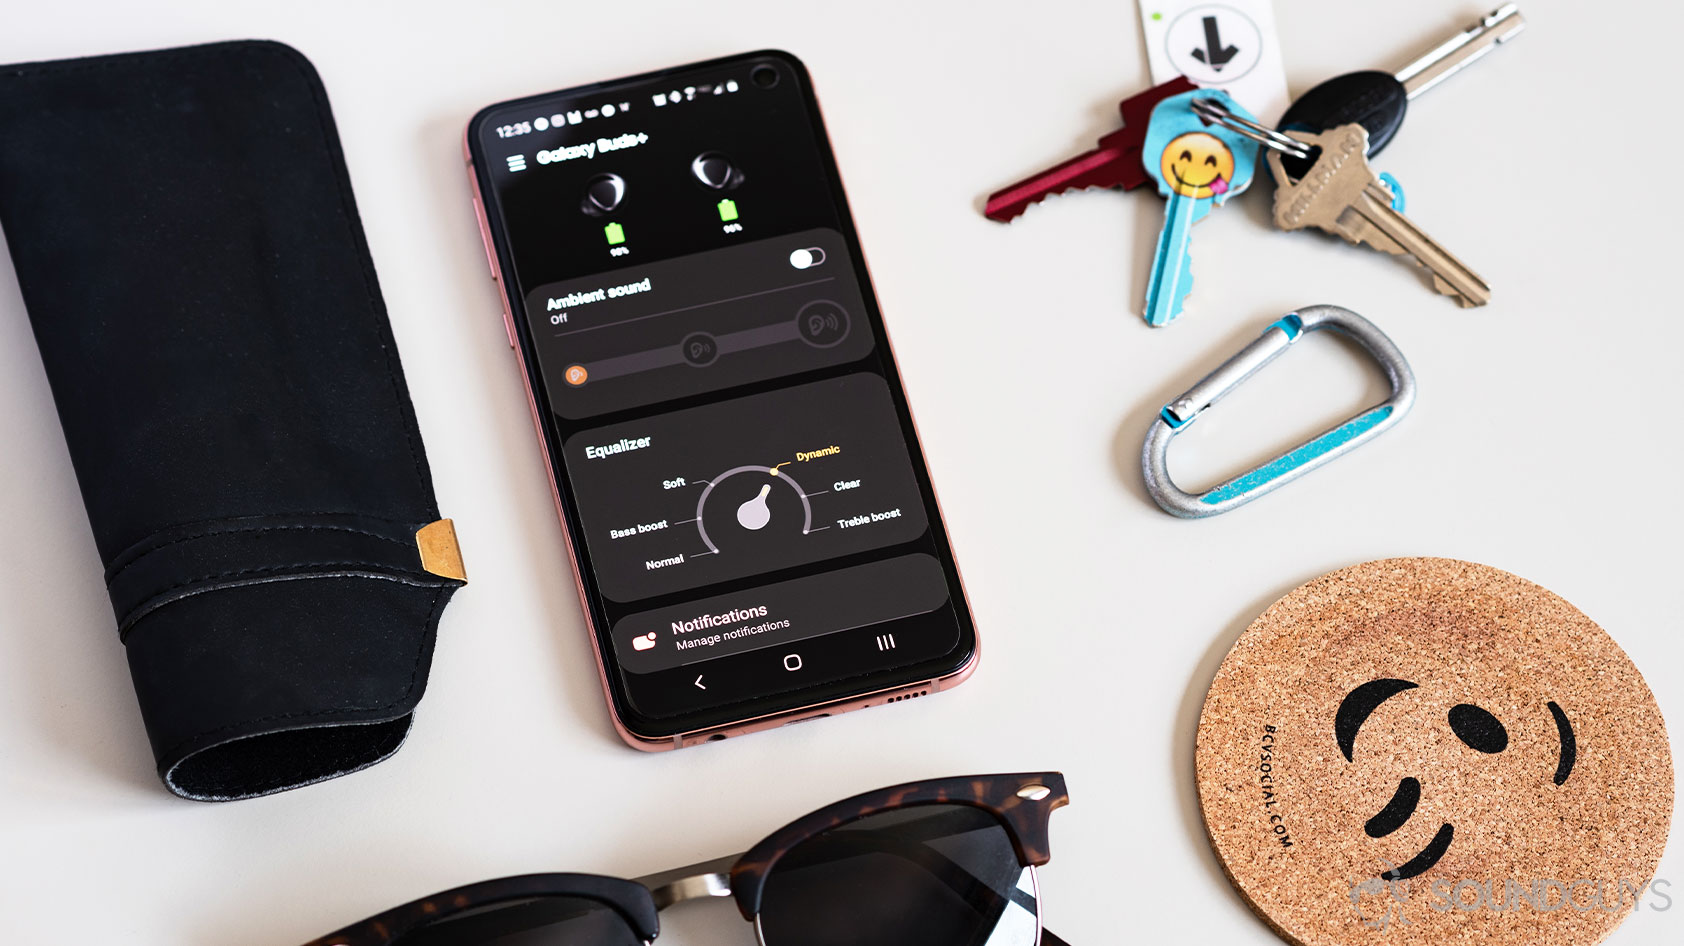 The Samsung Galaxy Wearable app pulled up on a Samsung Galaxy S10e smartphone.